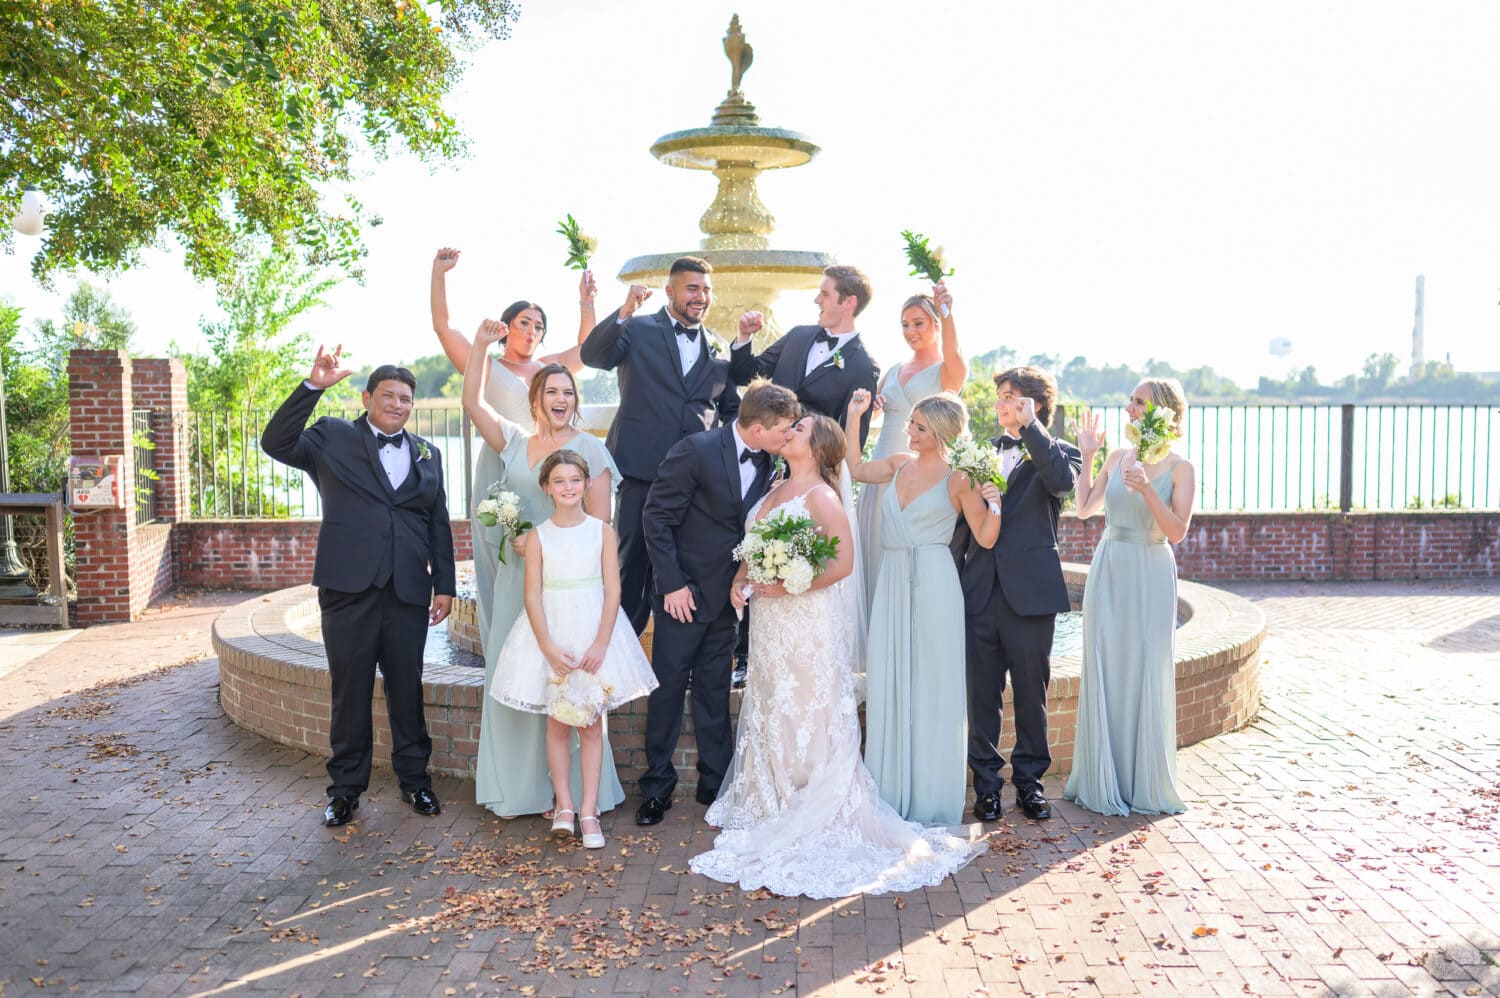 Groomsmen and bridesmaids cheering for bride and groom while they kiss - Kaminski House Museum